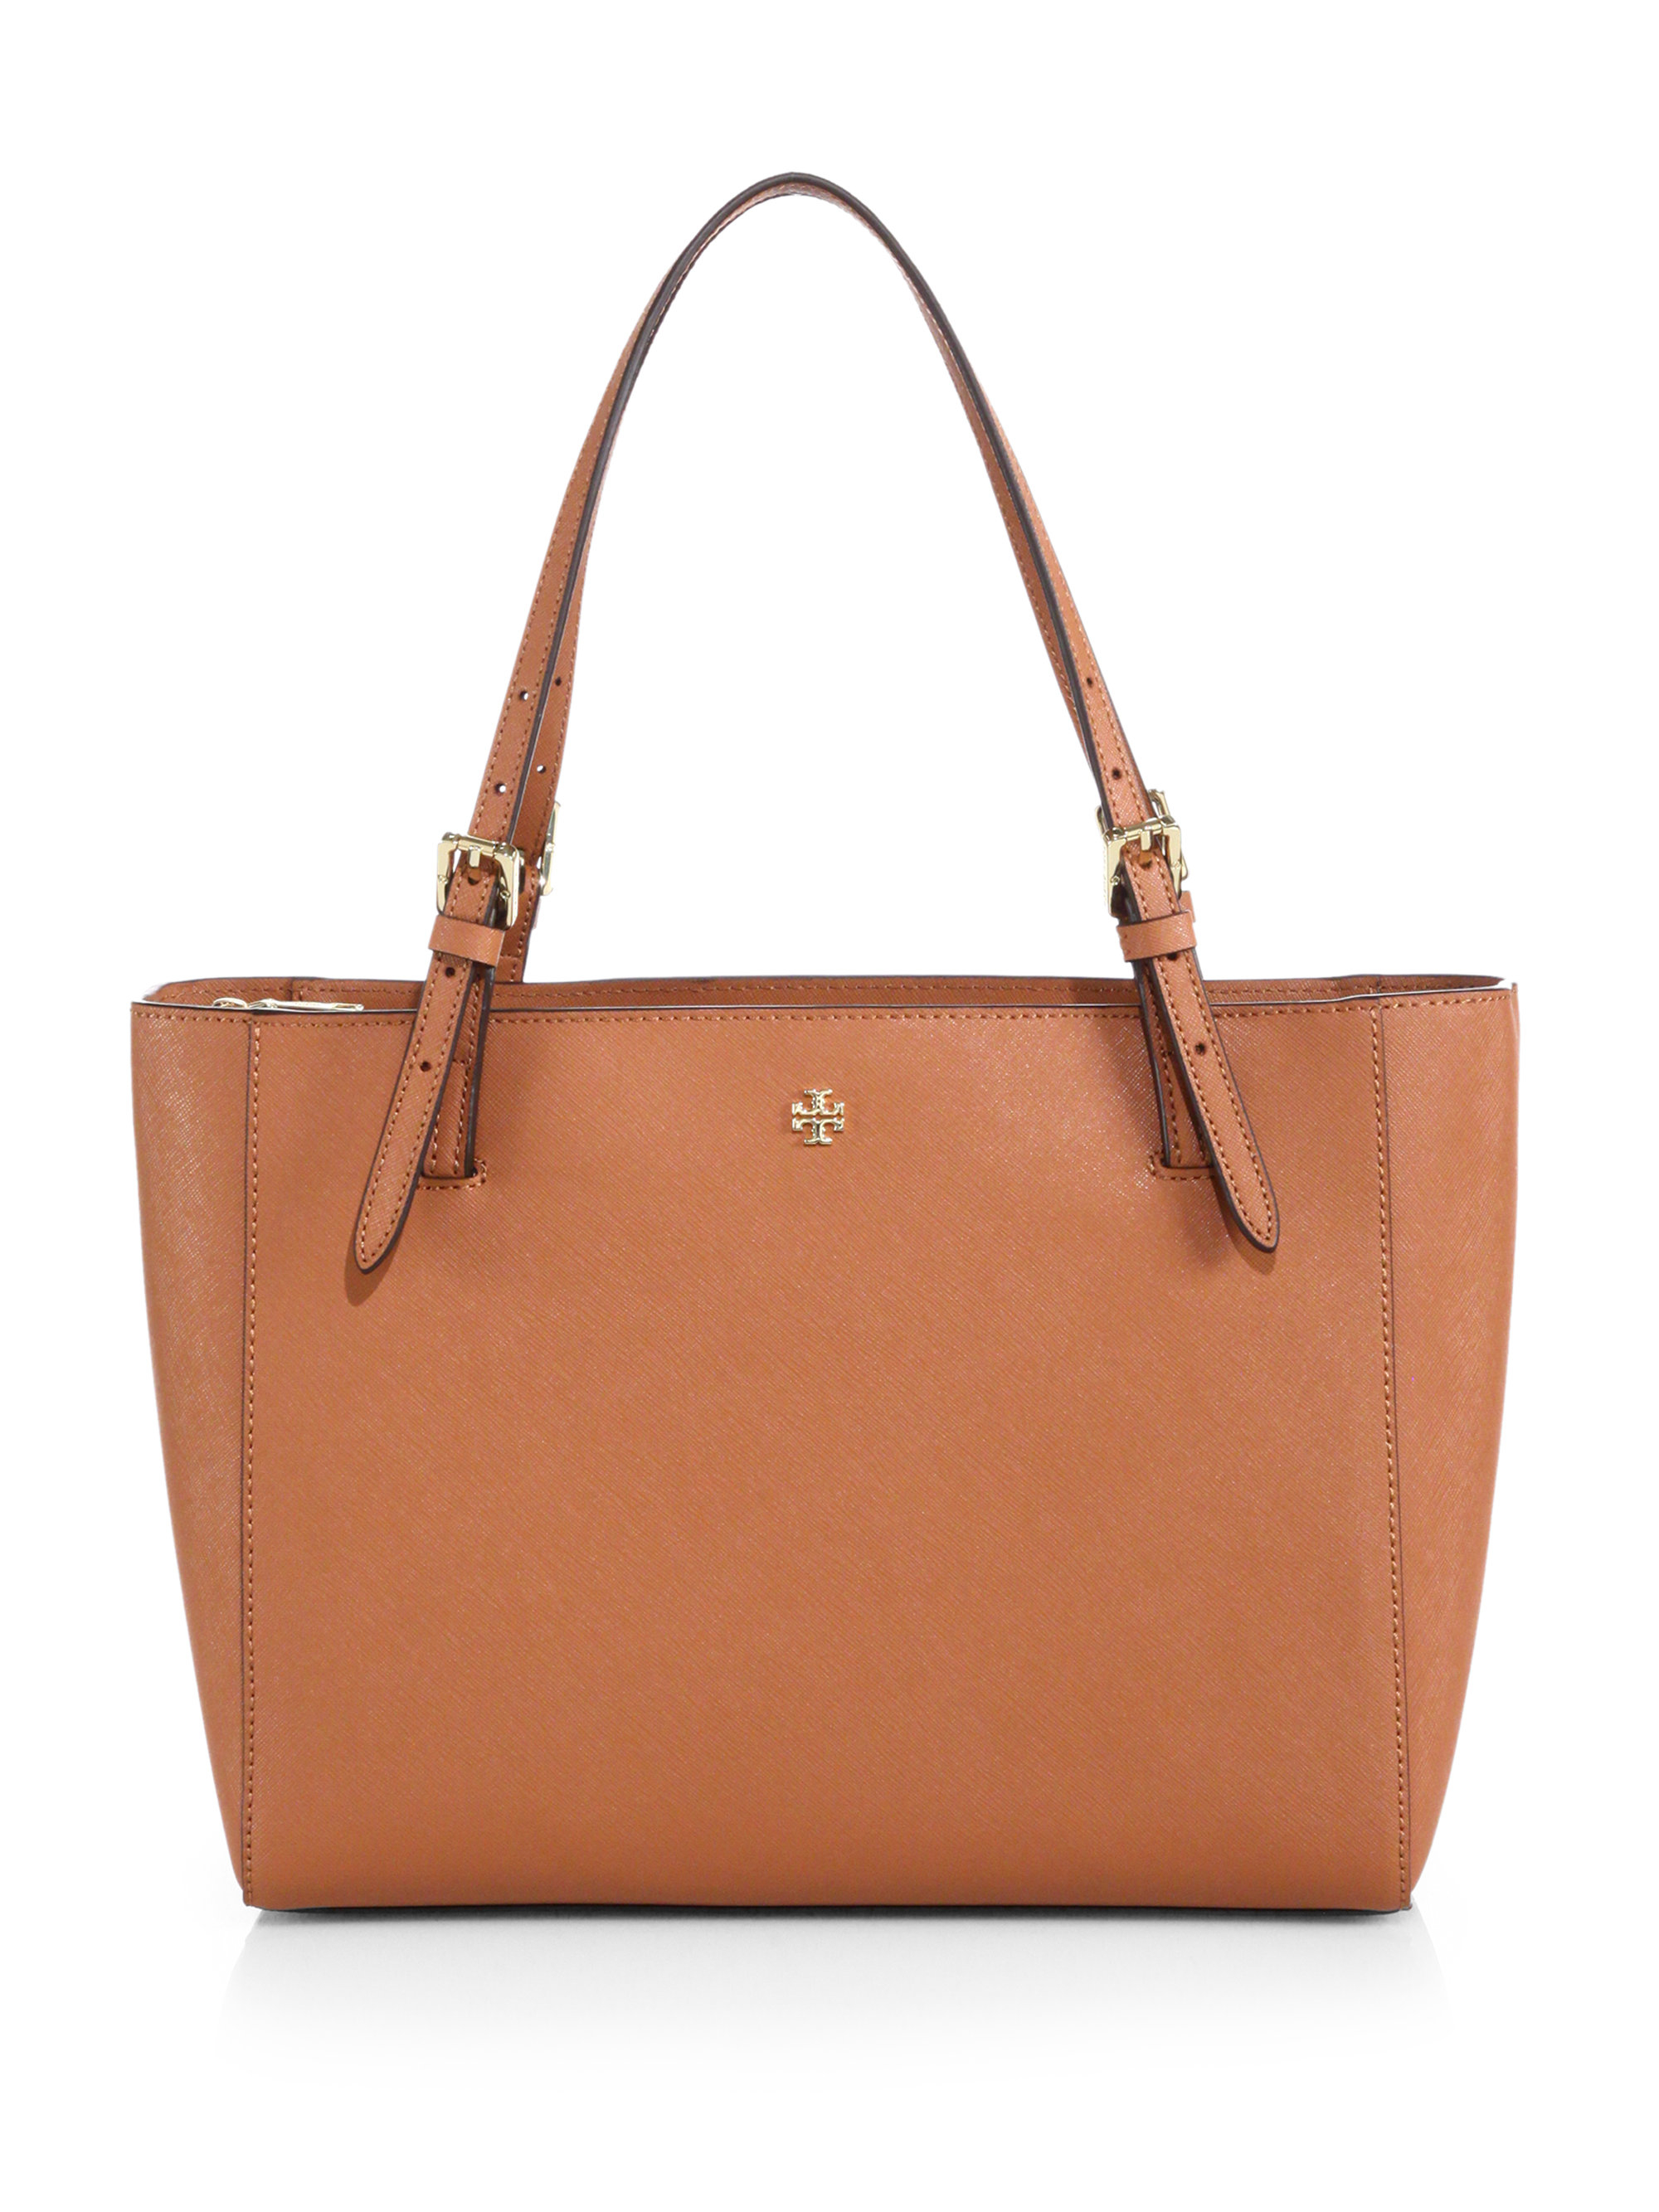 Tory burch York Small Saffiano-leather Tote in Brown | Lyst